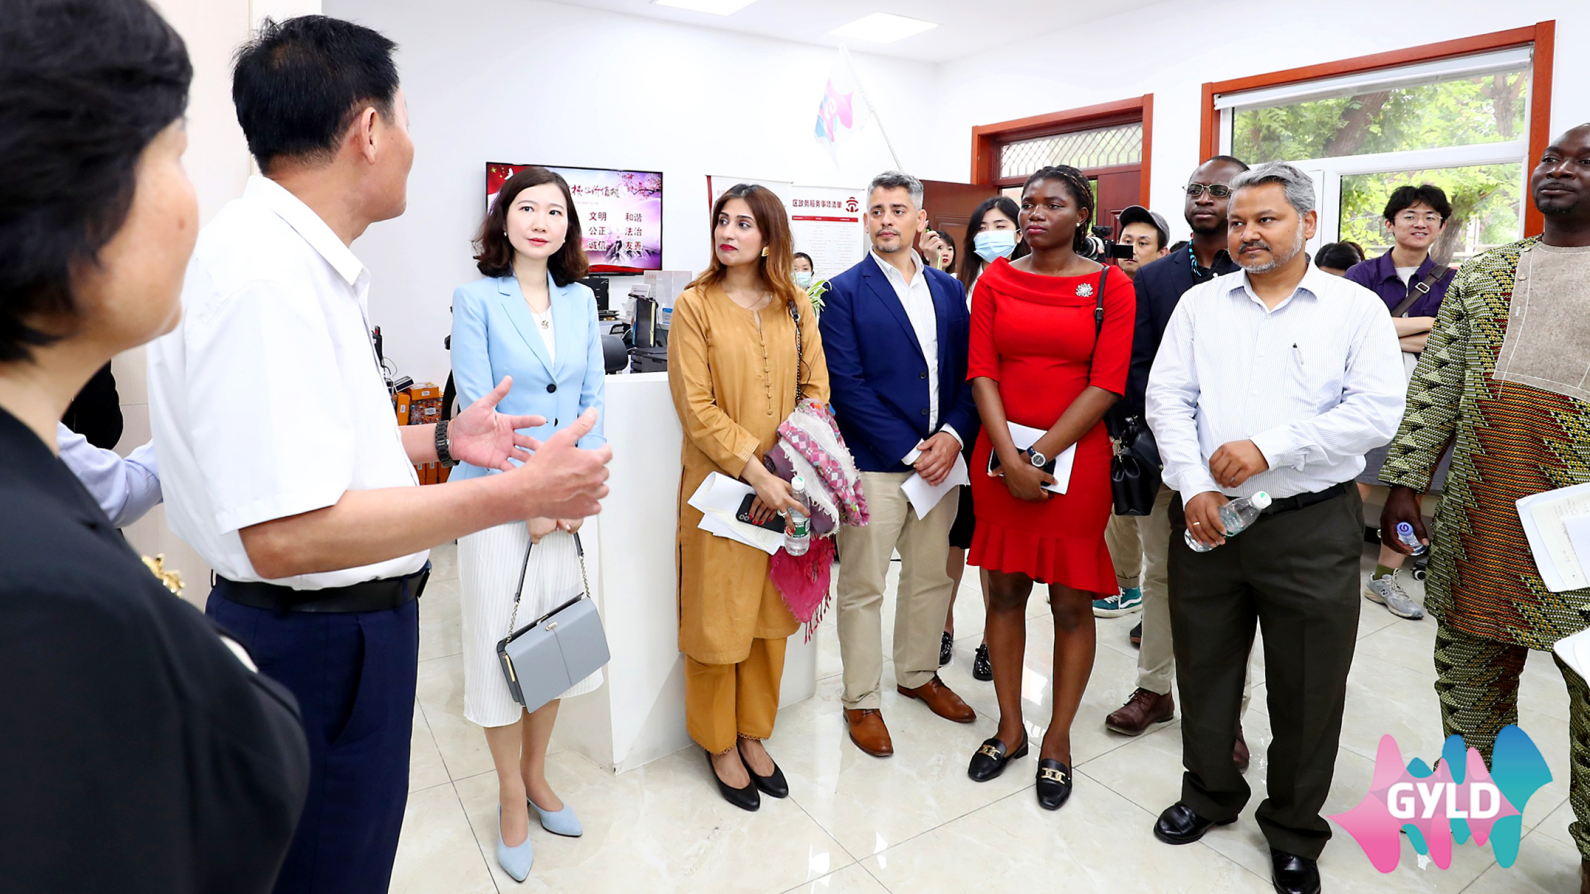 Zaoying Beili Community officials explain to the foreign scholars how welfare policies are efficiently implemented at the grassroots level, Chaoyang District, Beijing, May 31, 2023. /CCG